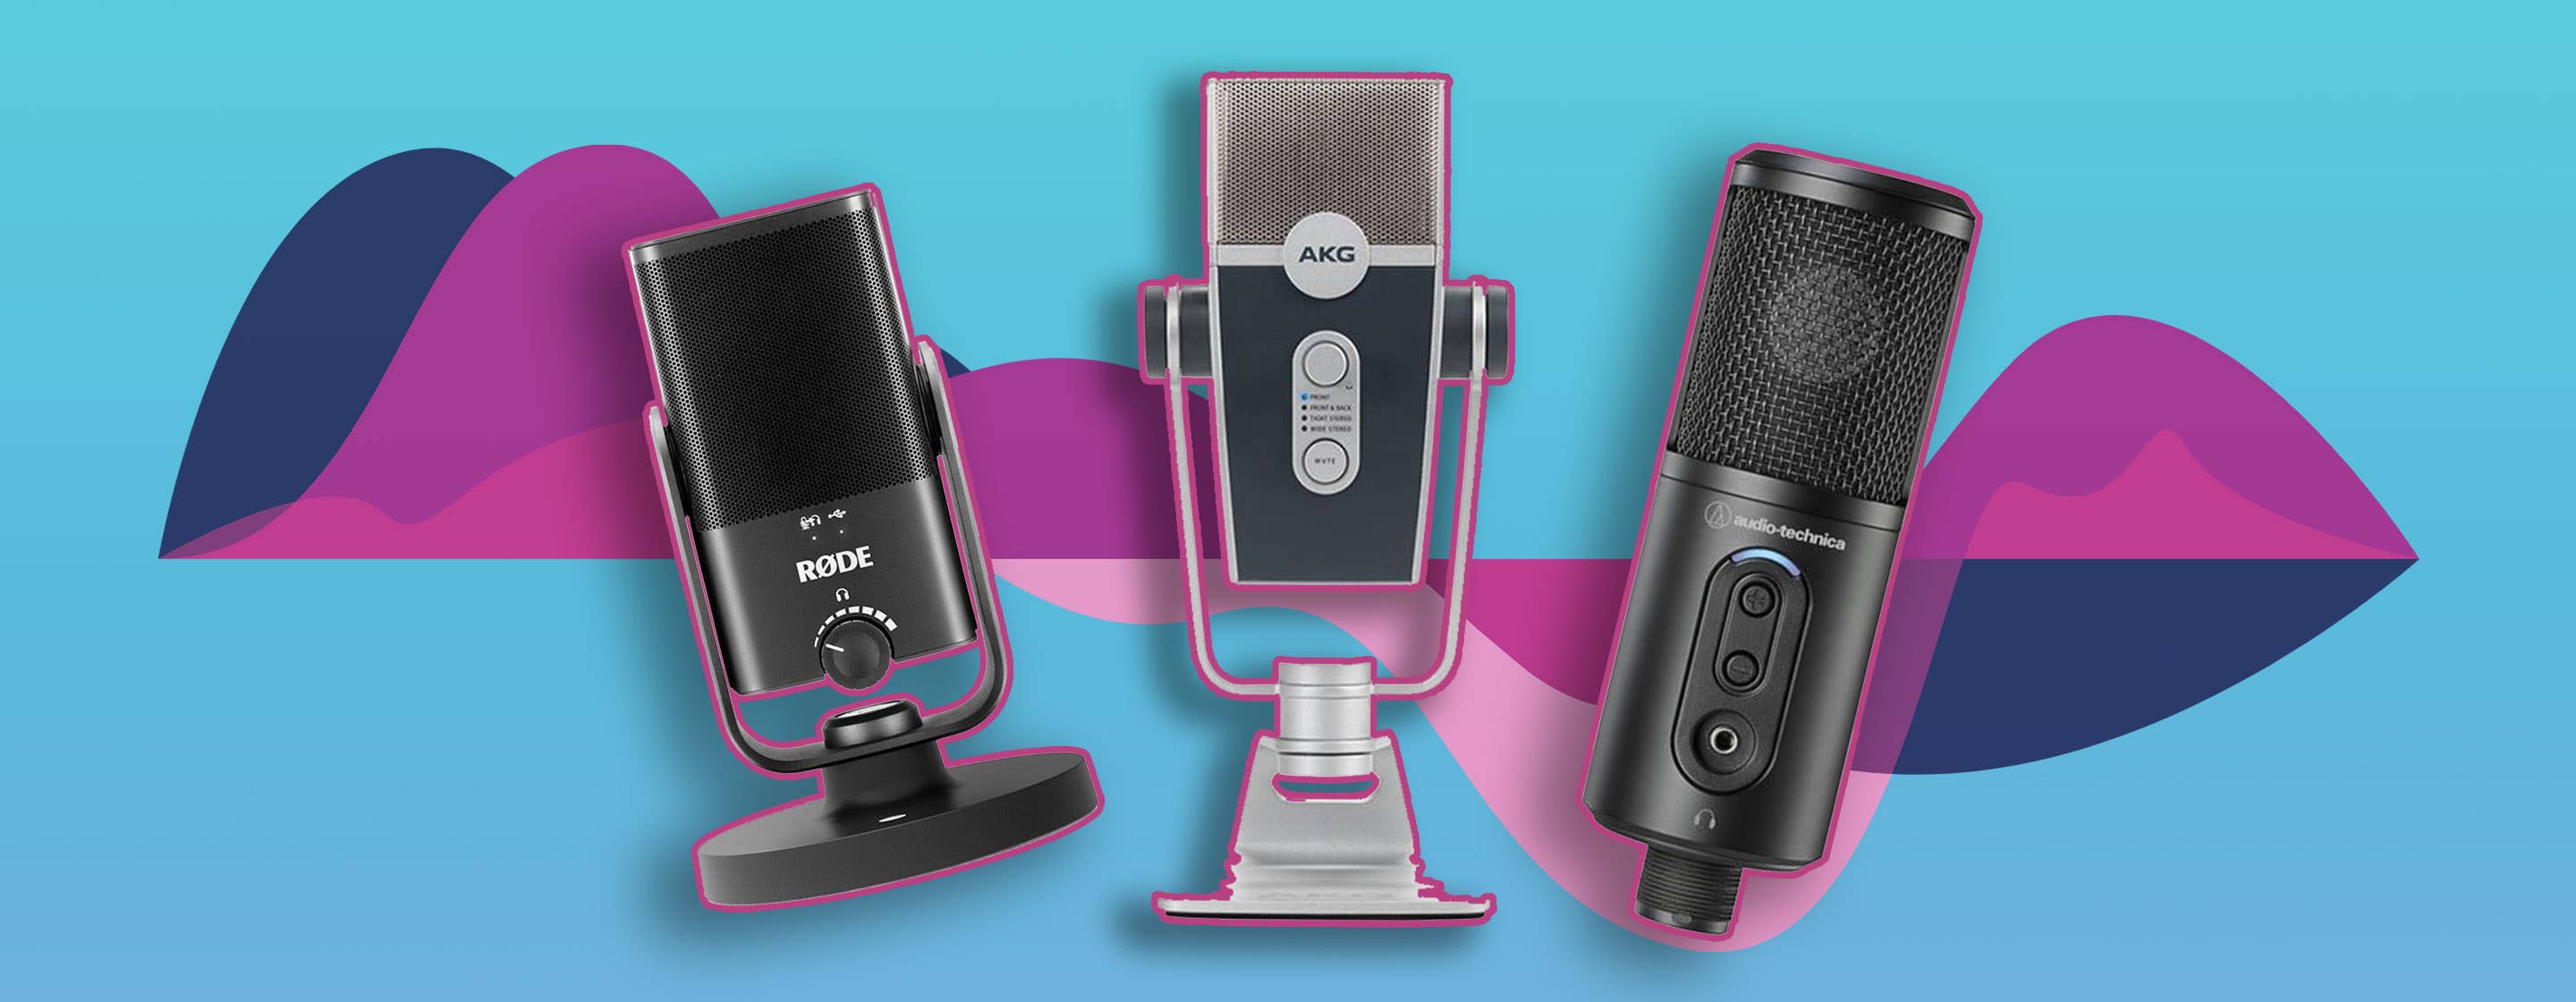 Our Favorite USB Microphones for Podcasting Under $200